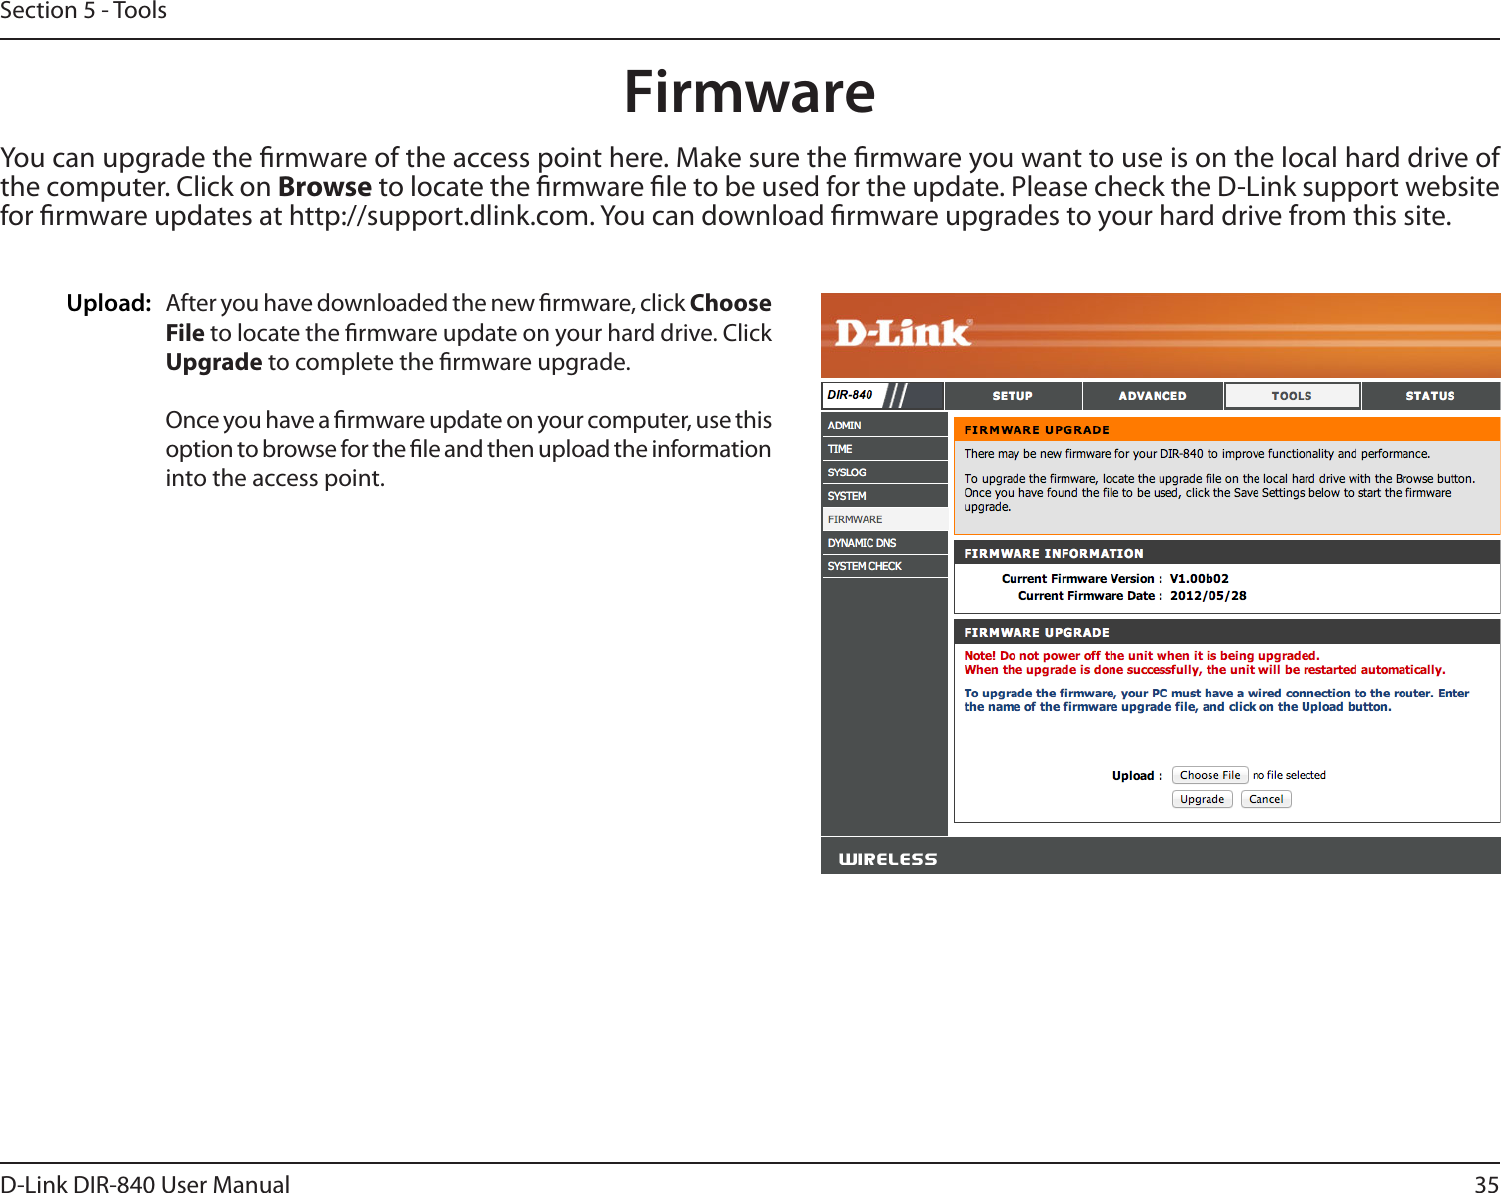 35D-Link DIR-840 User ManualSection 5 - ToolsFirmwareUpload: After you have downloaded the new rmware, click Choose File to locate the rmware update on your hard drive. Click Upgrade to complete the rmware upgrade.Once you have a rmware update on your computer, use this option to browse for the le and then upload the information into the access point. You can upgrade the rmware of the access point here. Make sure the rmware you want to use is on the local hard drive of the computer. Click on Browse to locate the rmware le to be used for the update. Please check the D-Link support website for rmware updates at http://support.dlink.com. You can download rmware upgrades to your hard drive from this site.